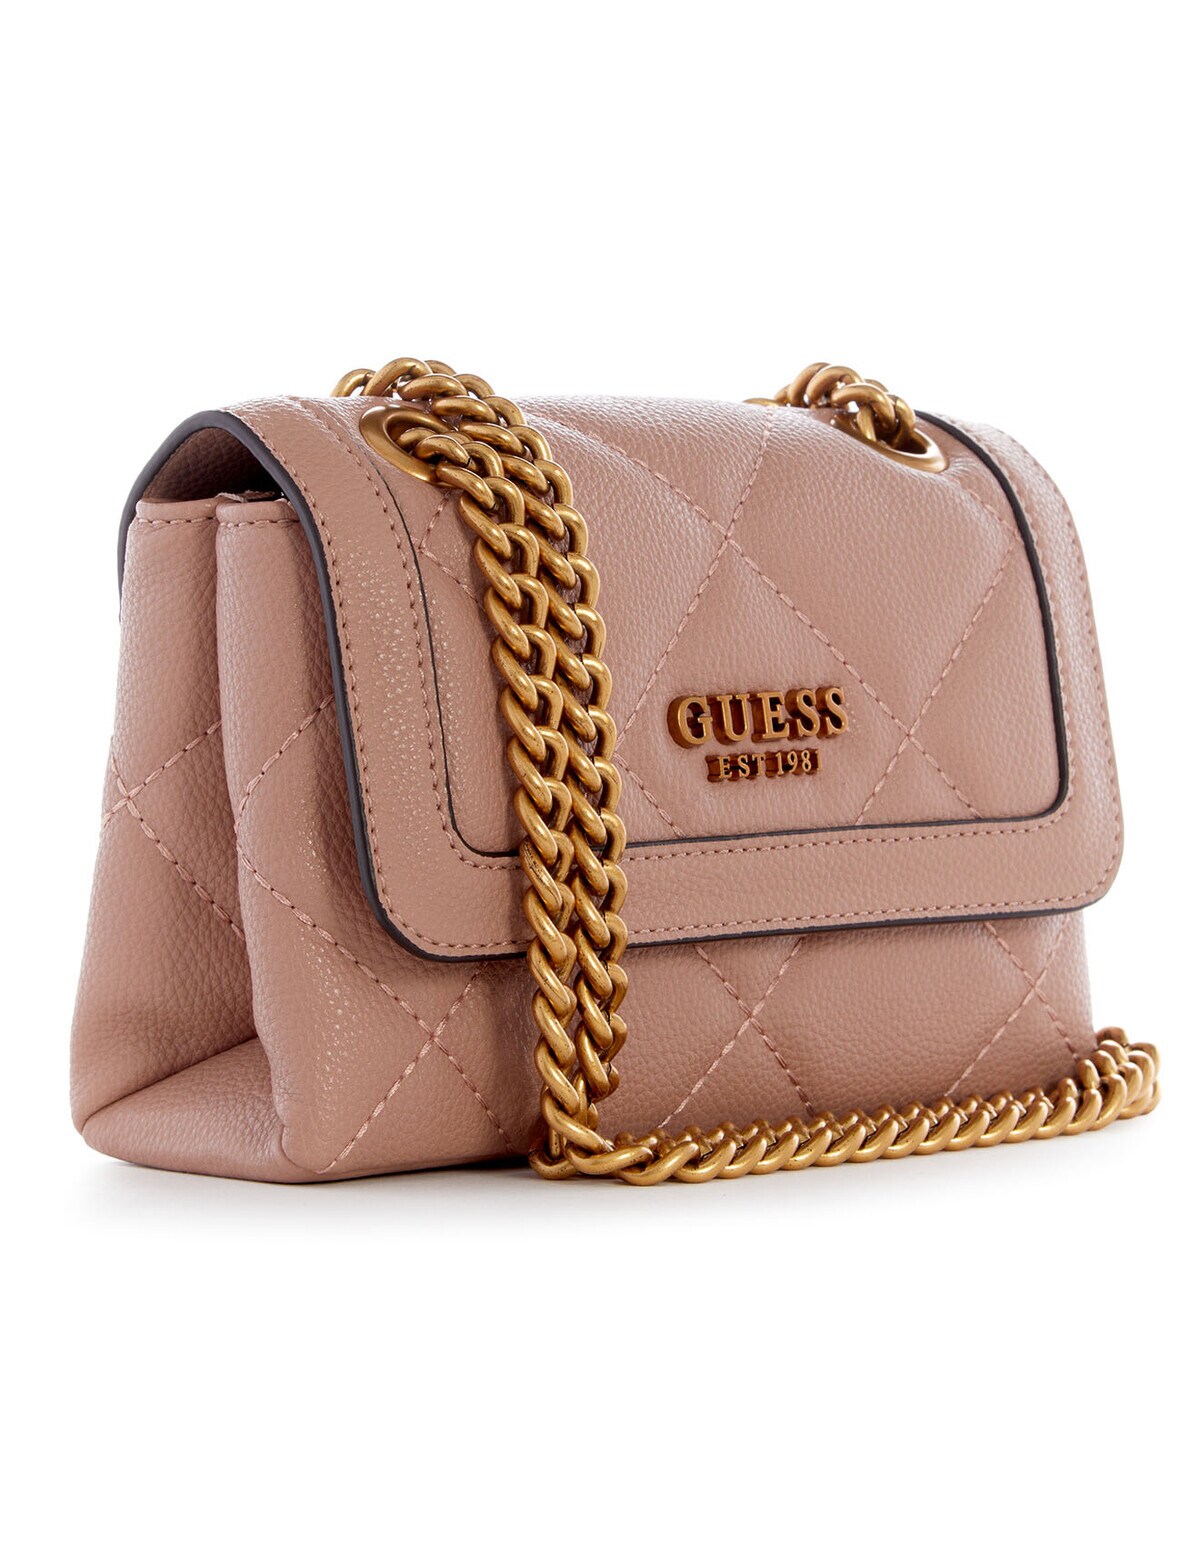 Guess Abey Crossbody Purse - Women's Bags in Rosewood